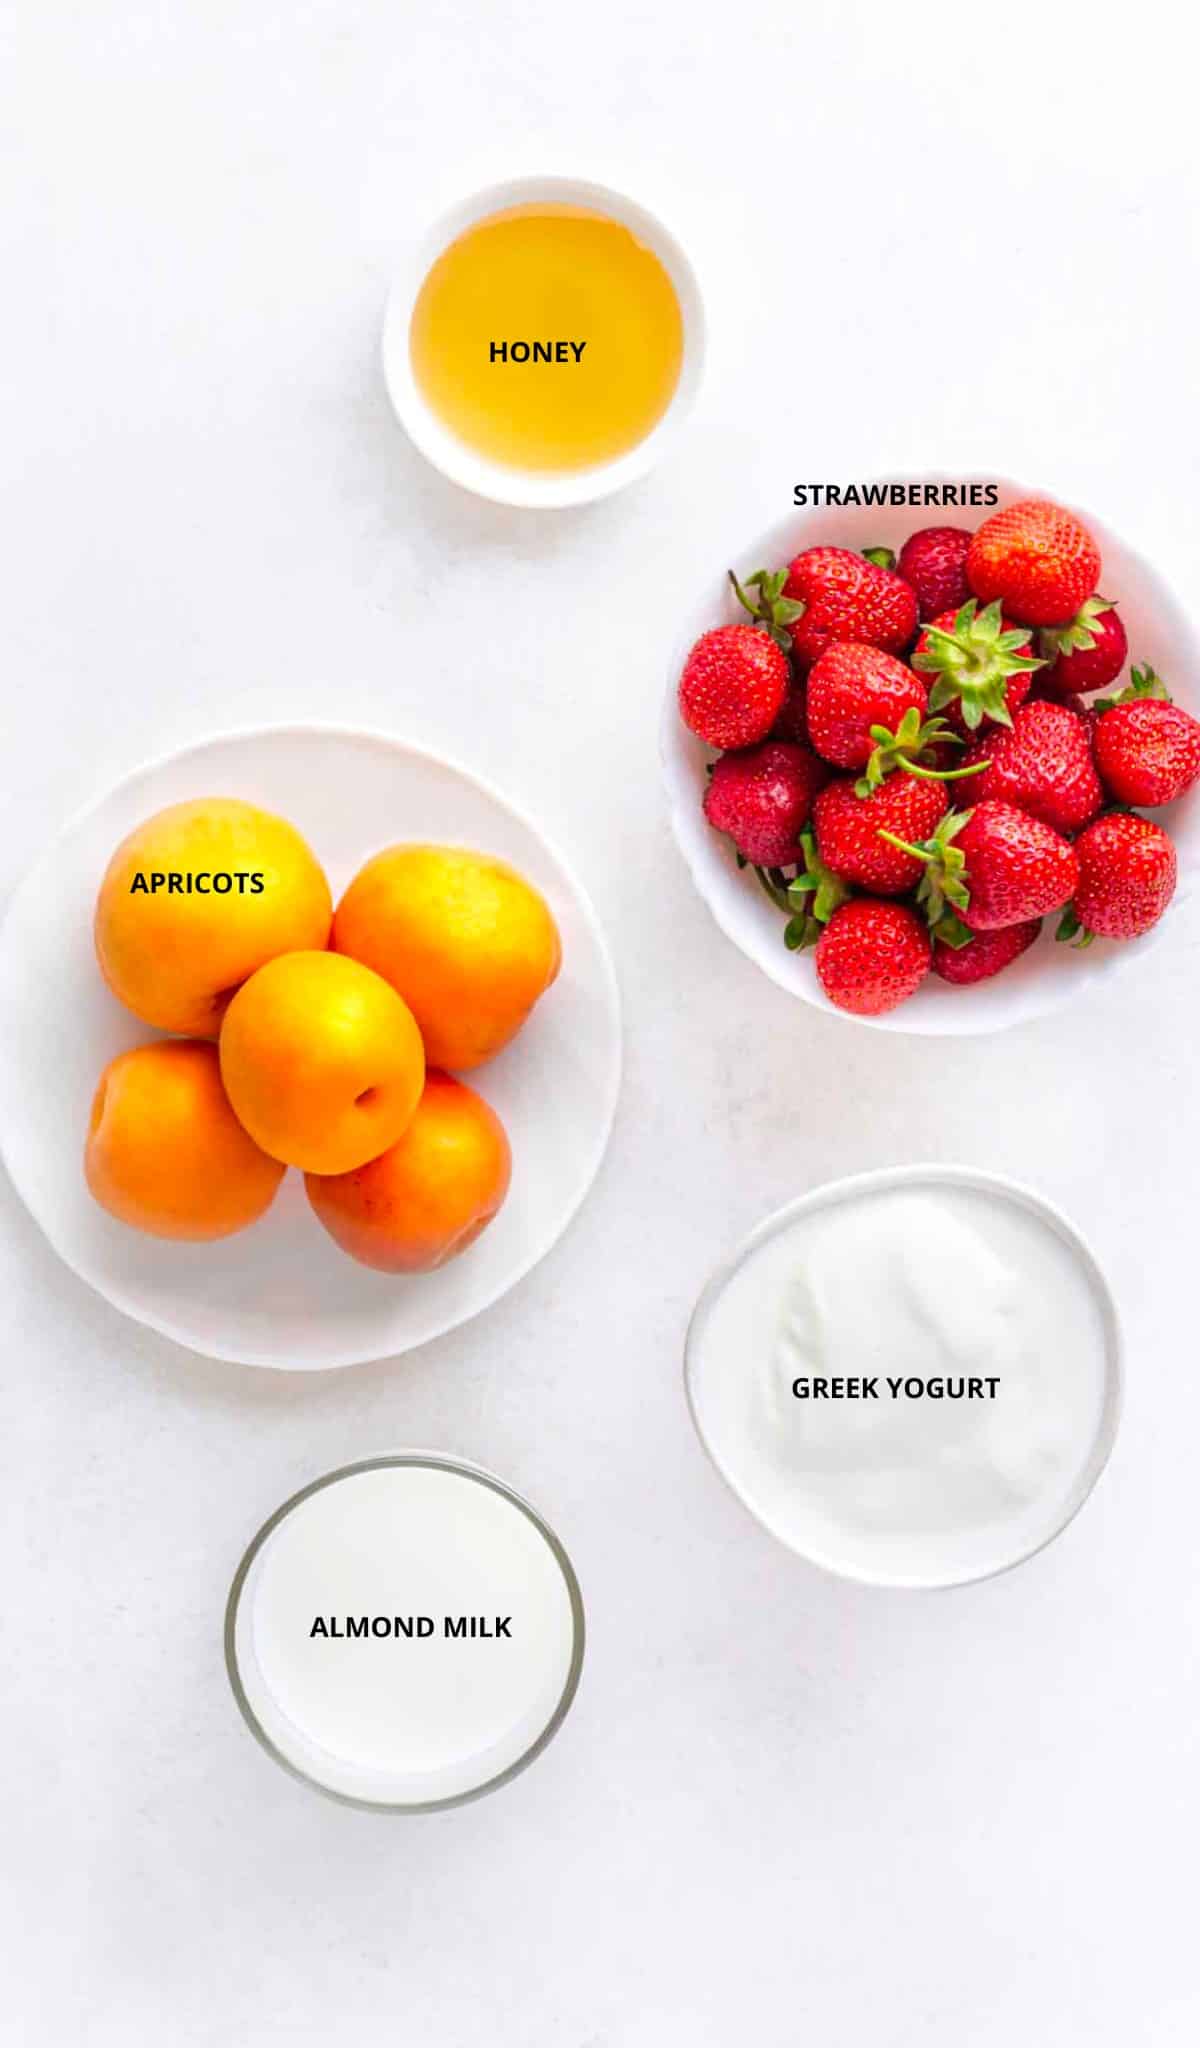 Ingredients for apricot smoothie with strawberries- honey, apricots, strawberries, almond milk, and greek yogurt. 